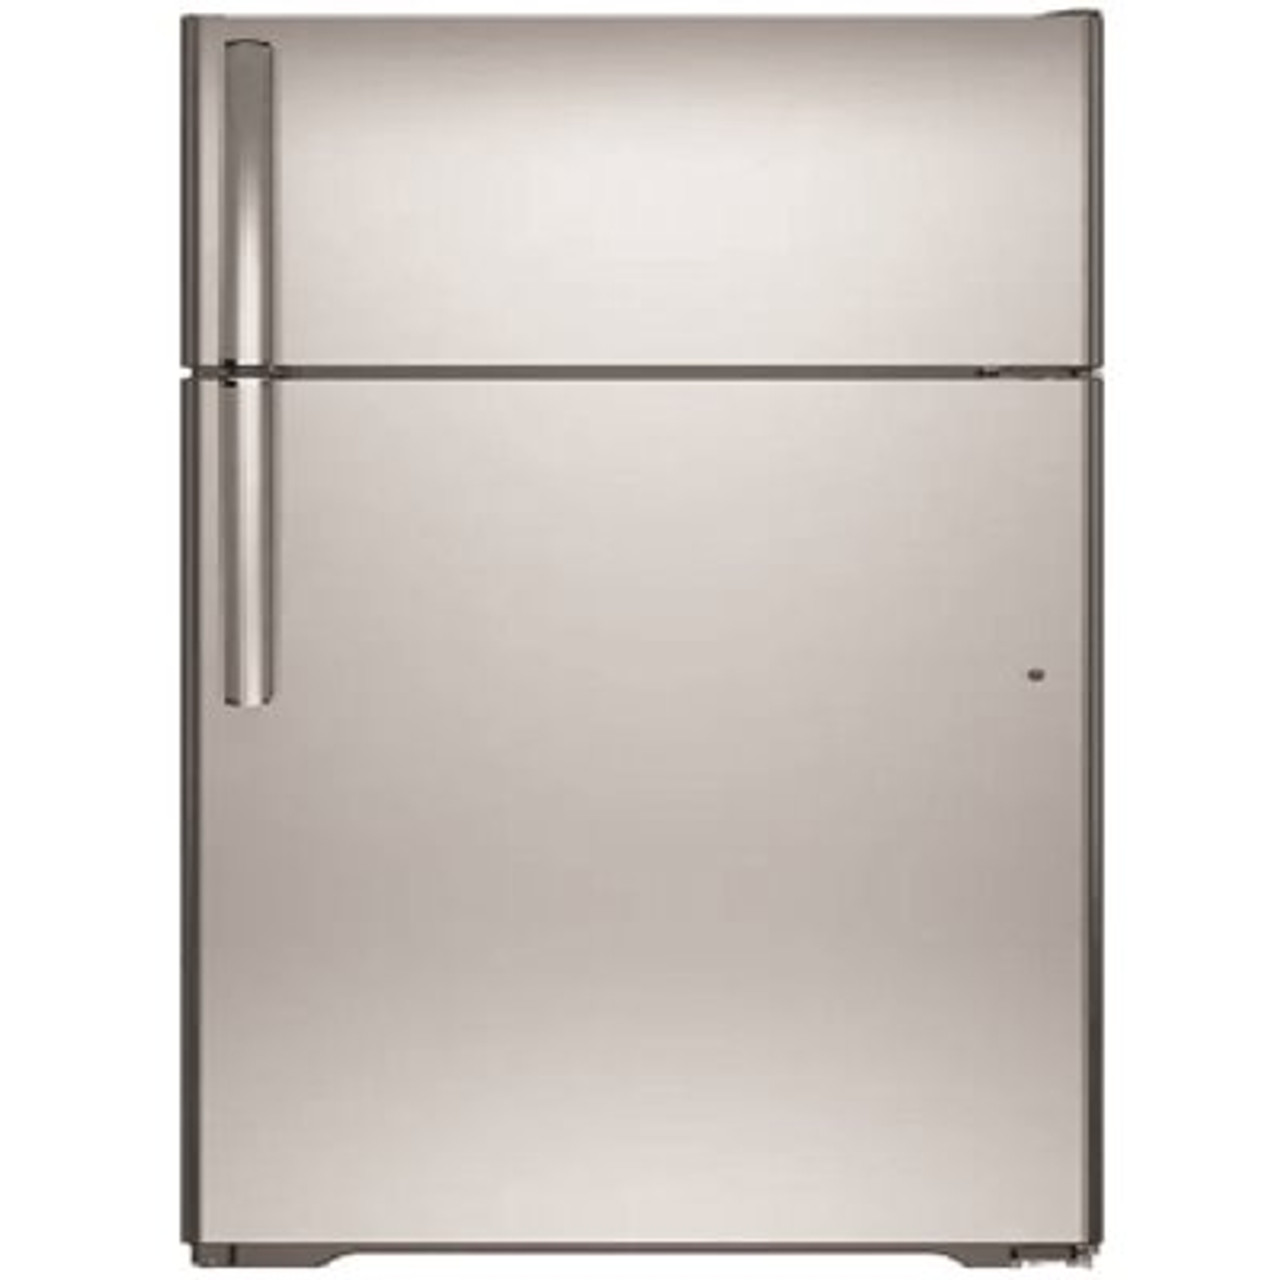 Crosley 17.5 cu. ft. White Built in and Standard Refrigerator in Stainless Steel